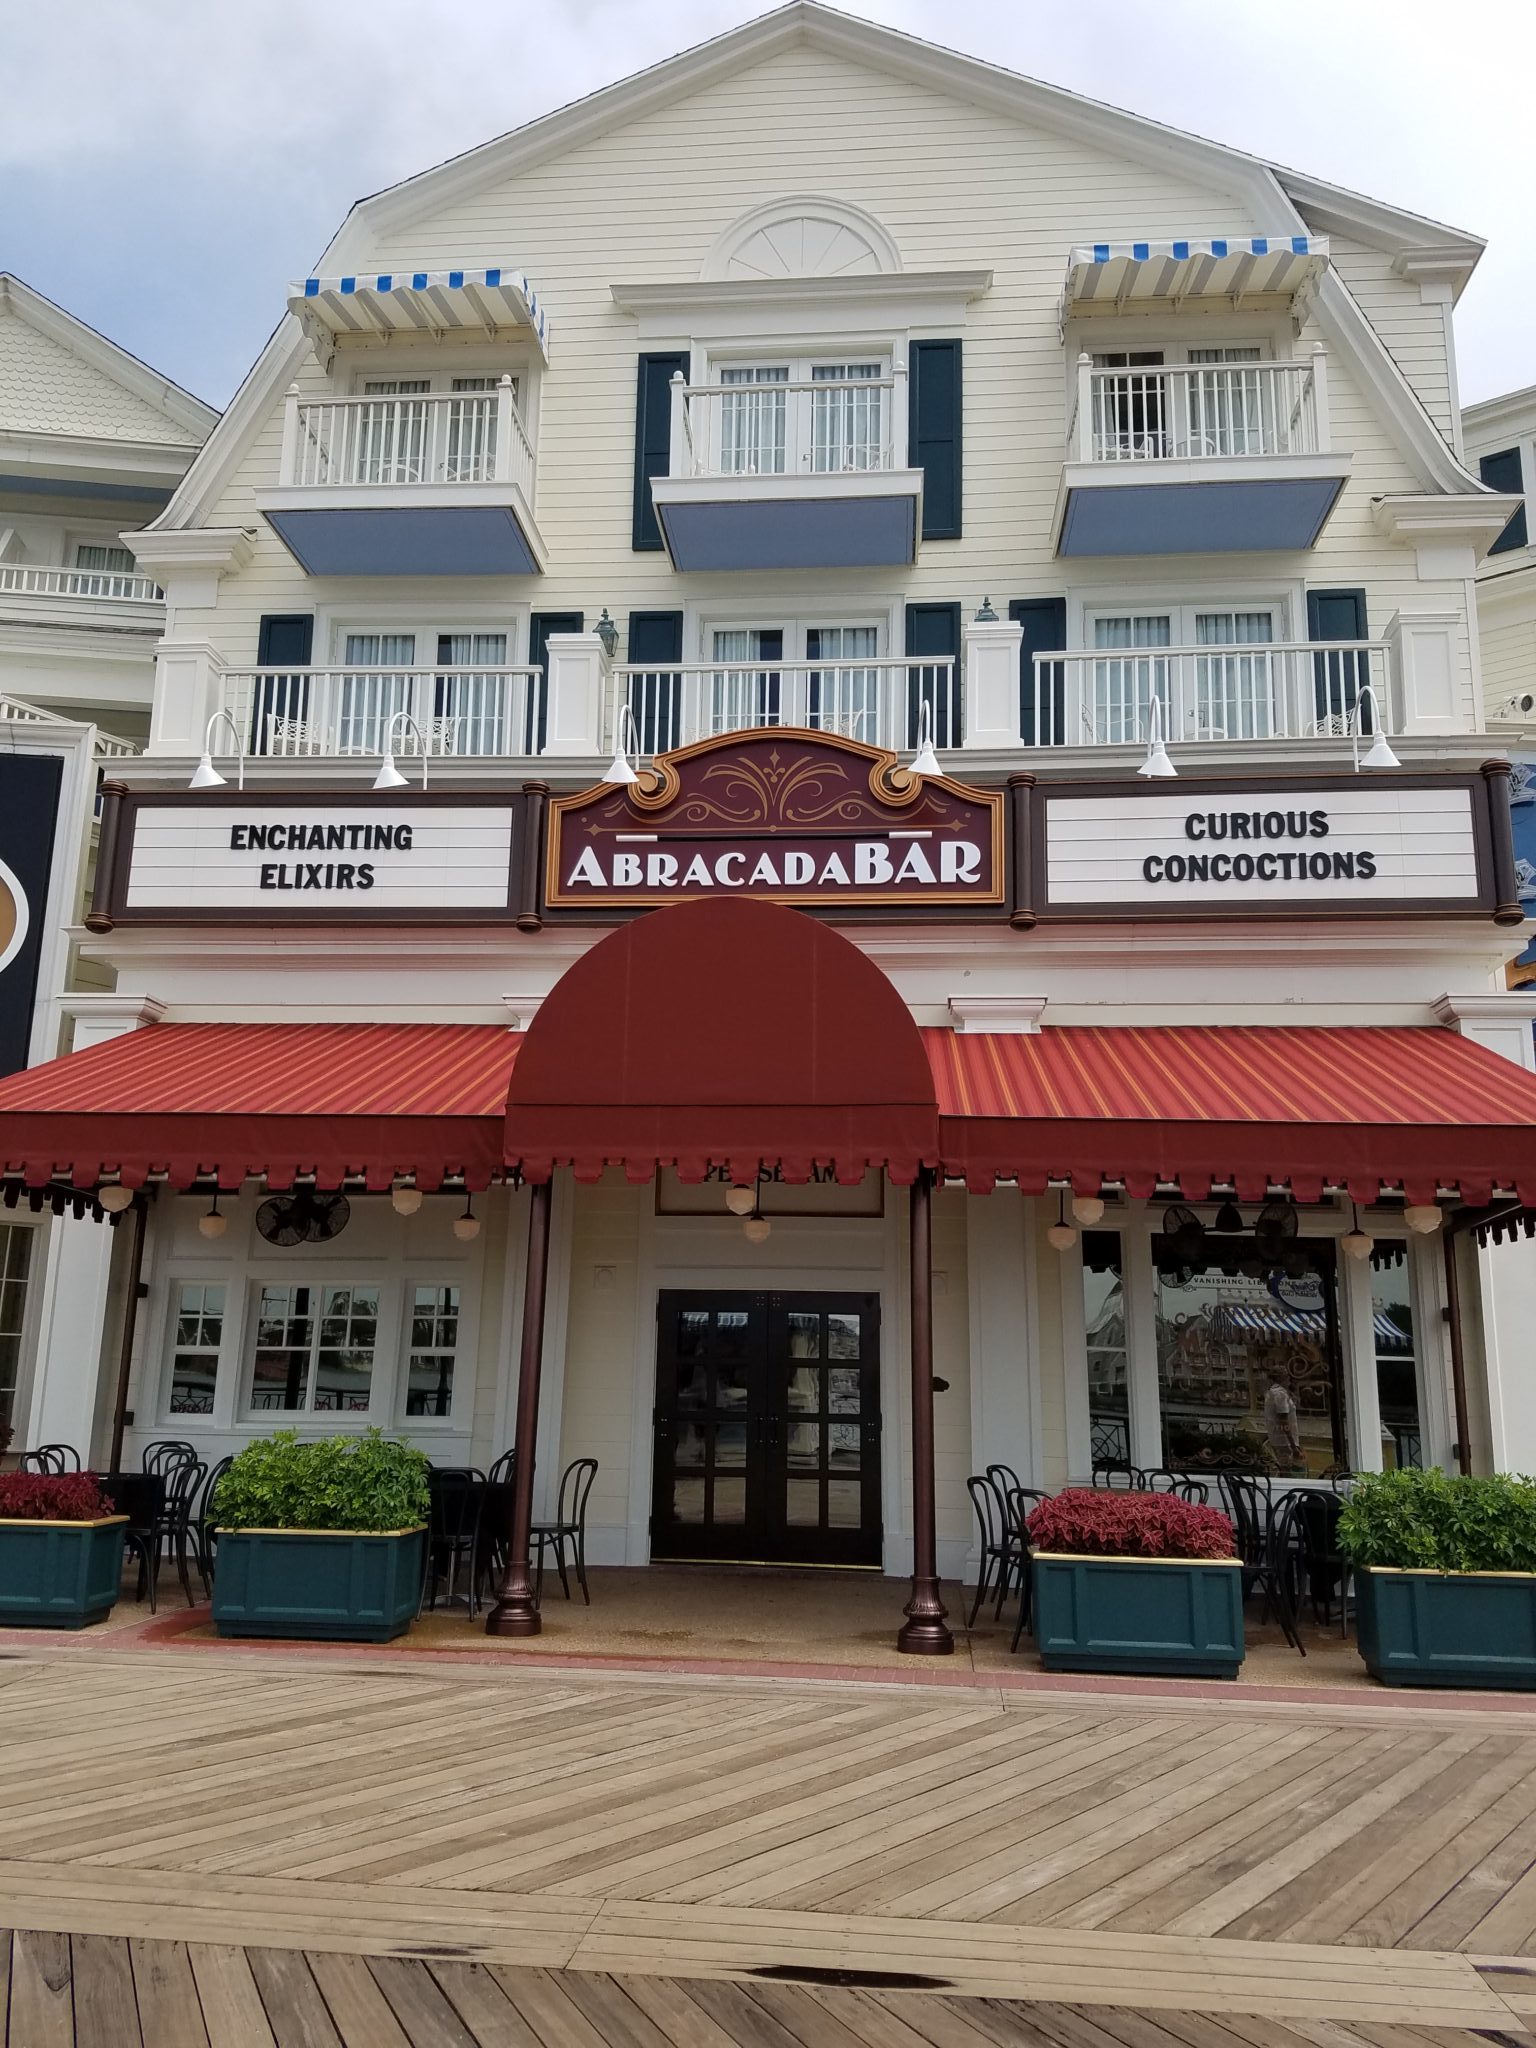 AbracadaBar in Disney’s Boardwalk Offers Curious Cocktails in a Magical Atmosphere